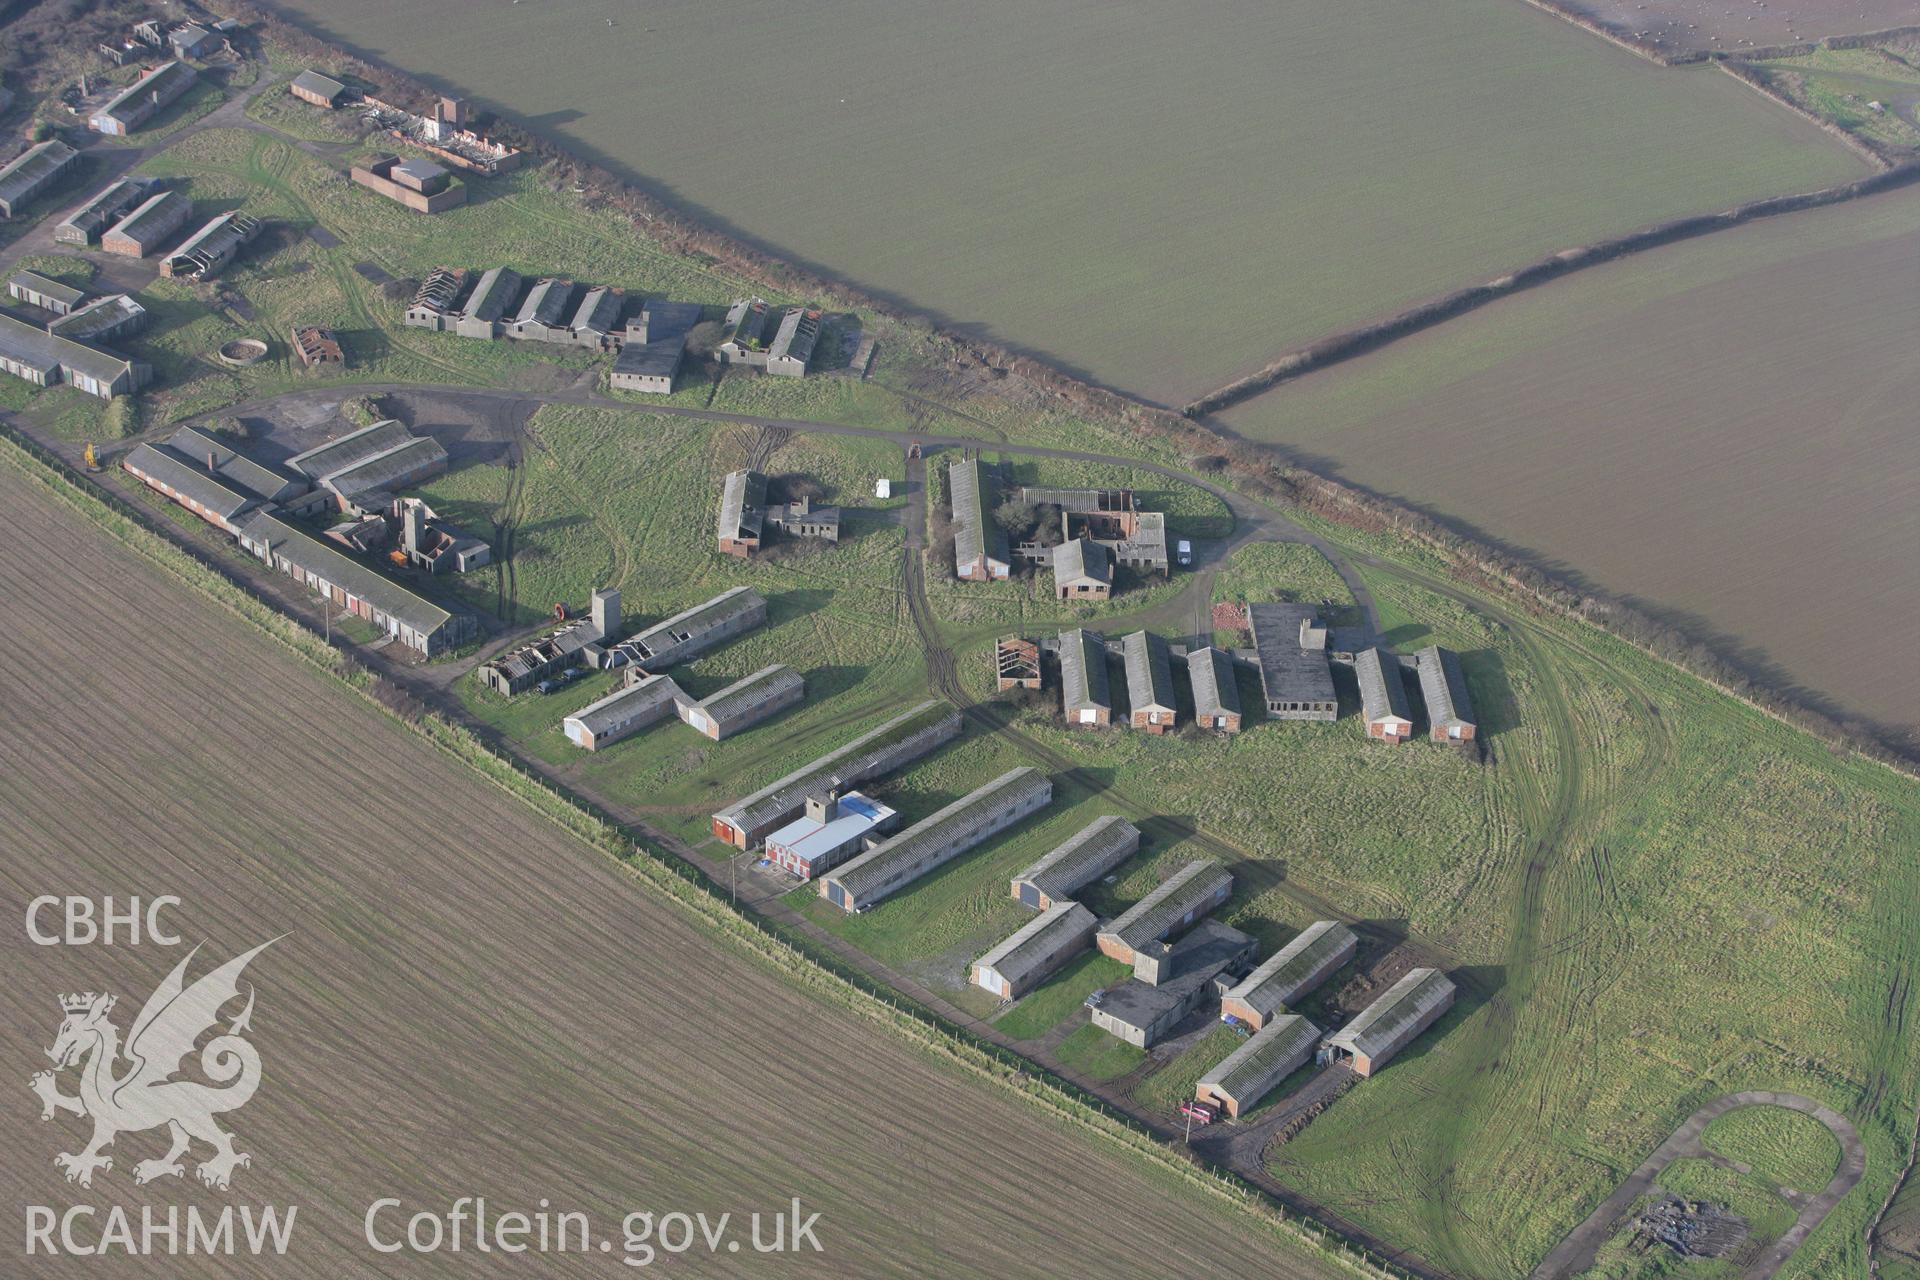 RCAHMW colour oblique aerial photograph of Dale Airfield. Taken on 28 January 2009 by Toby Driver